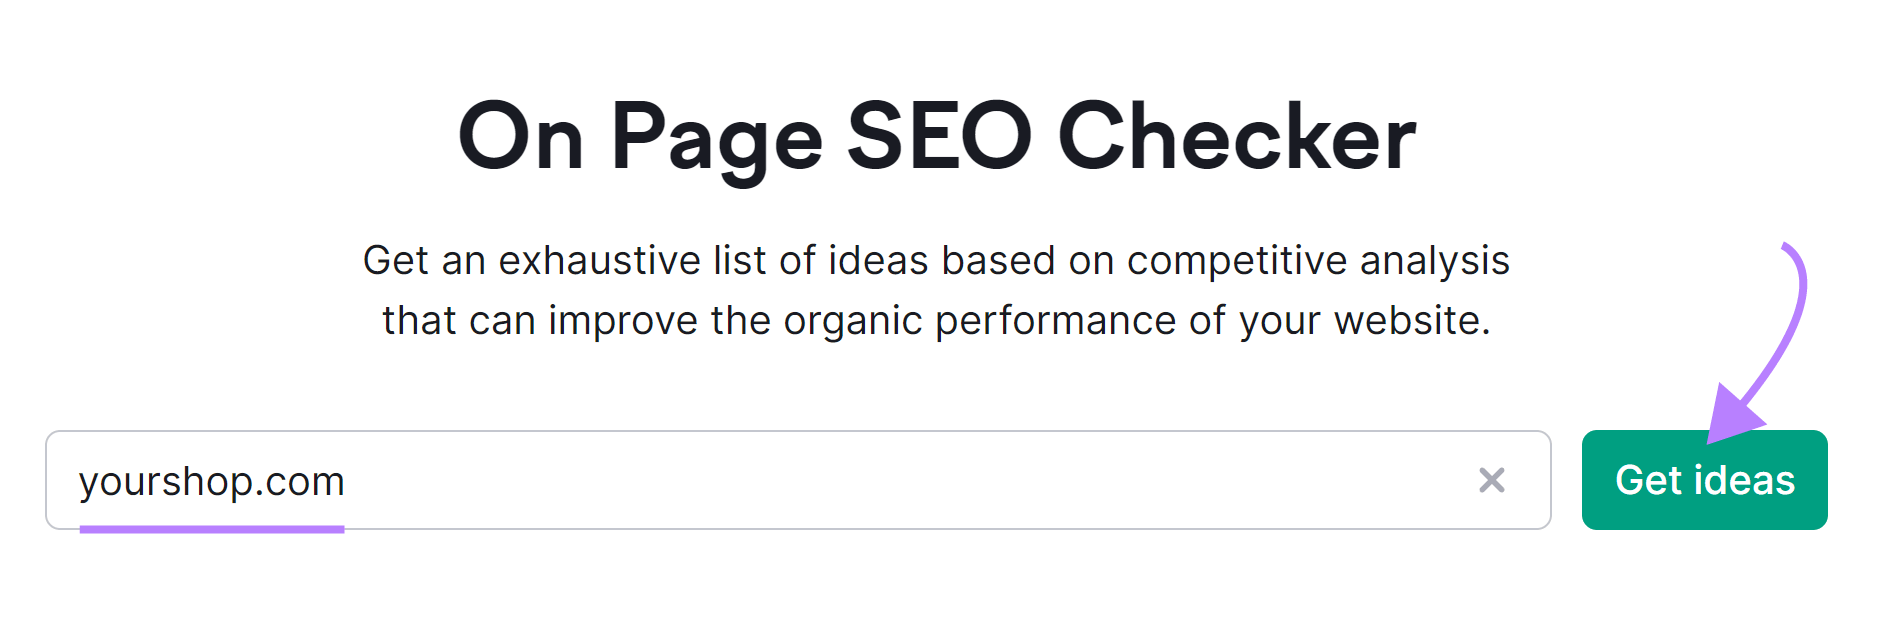 On Page SEO Checker with "yourshop.com" in the domain field